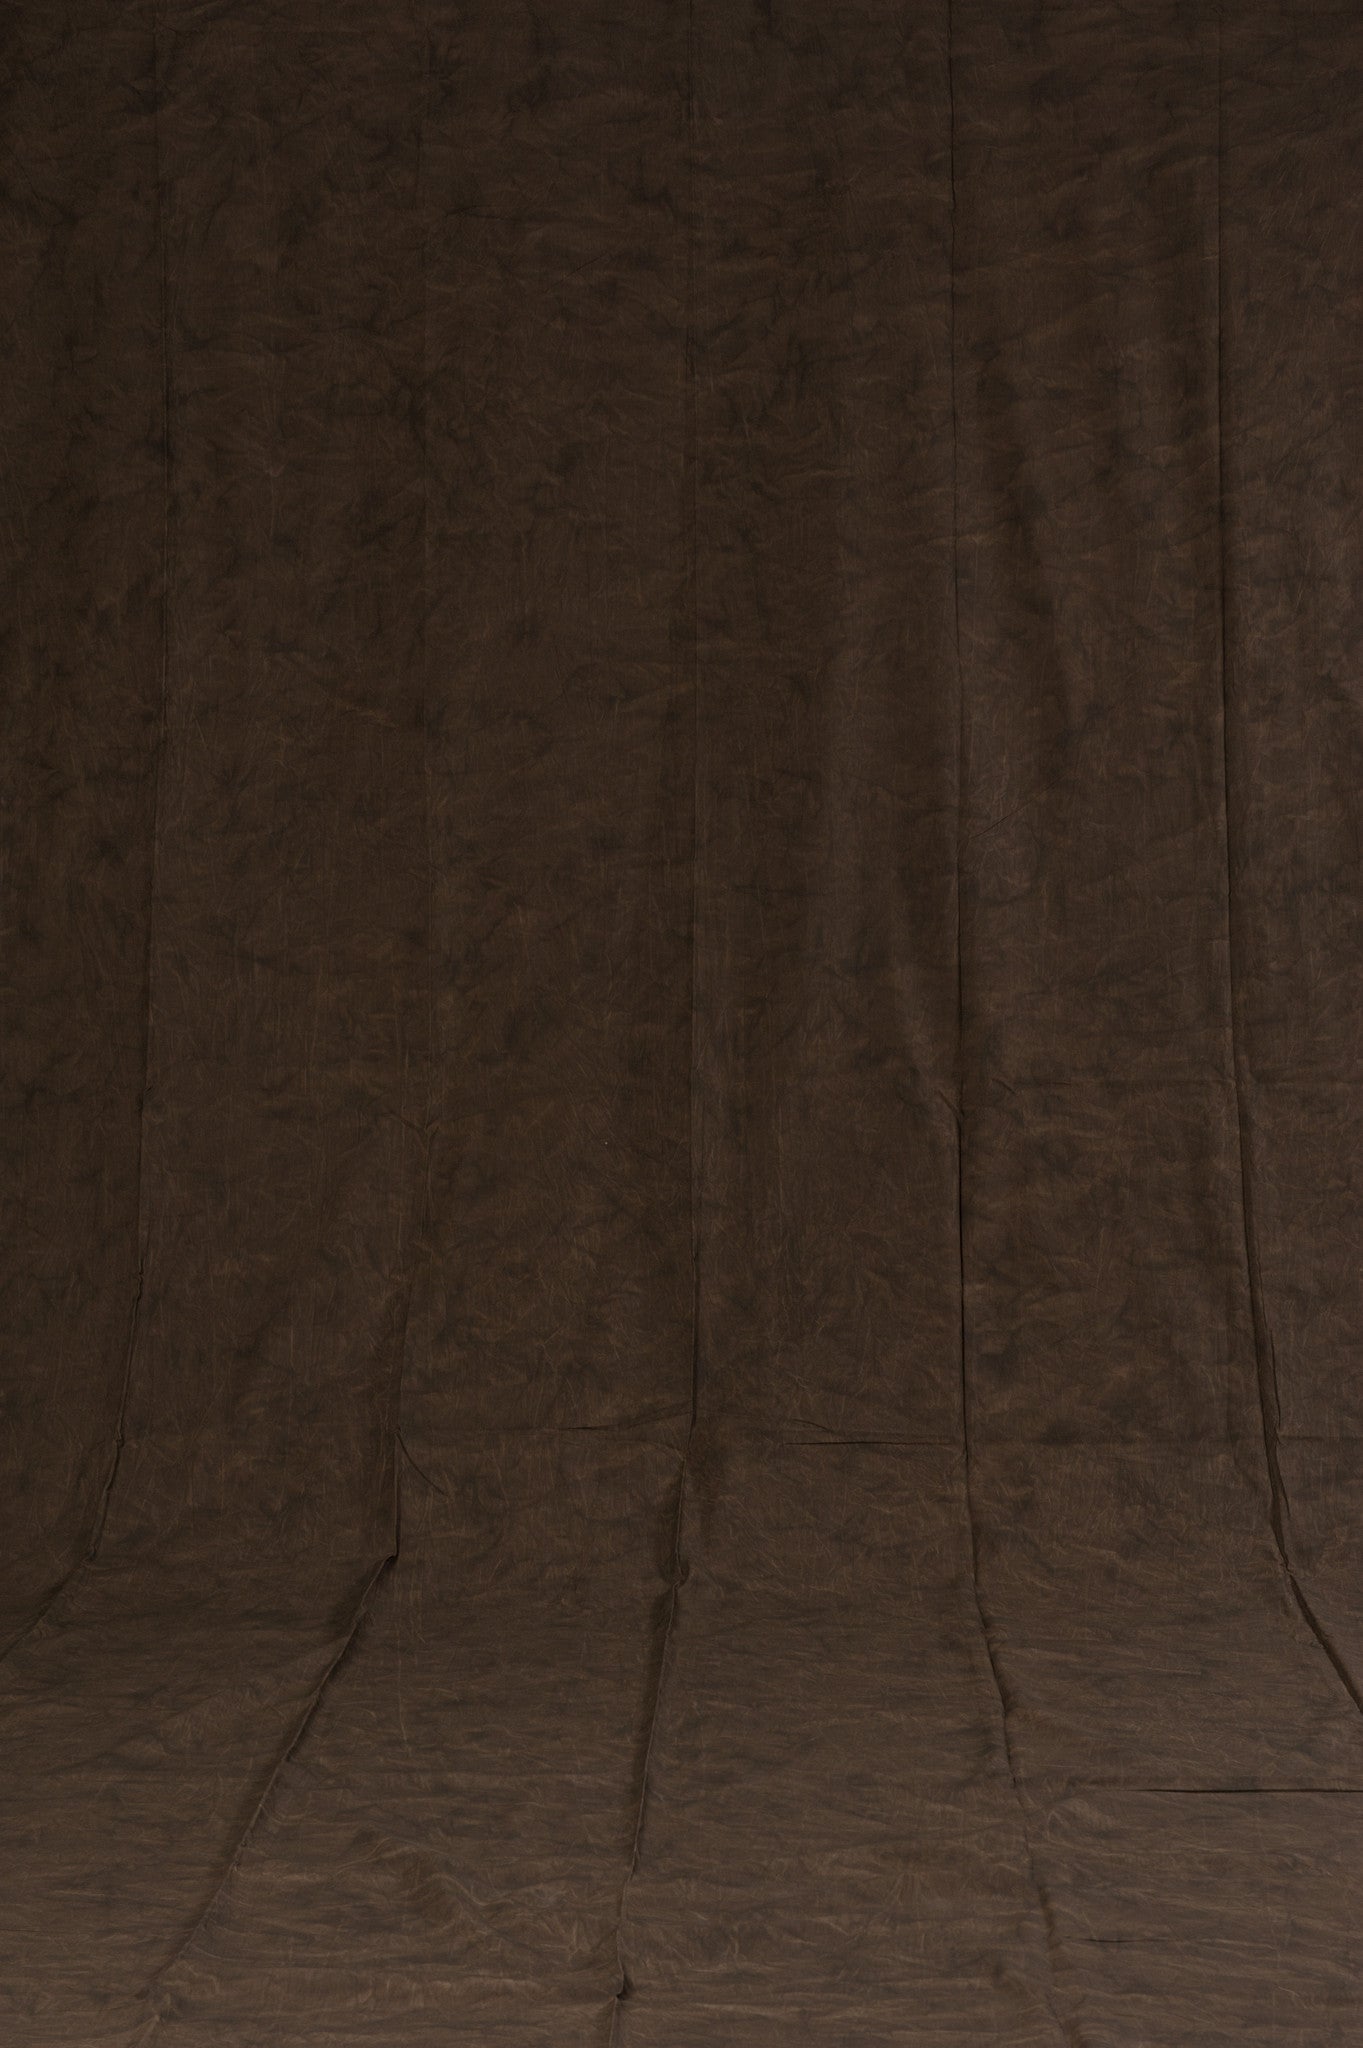 3D Reversible Photography Brown Fashion Muslin Background